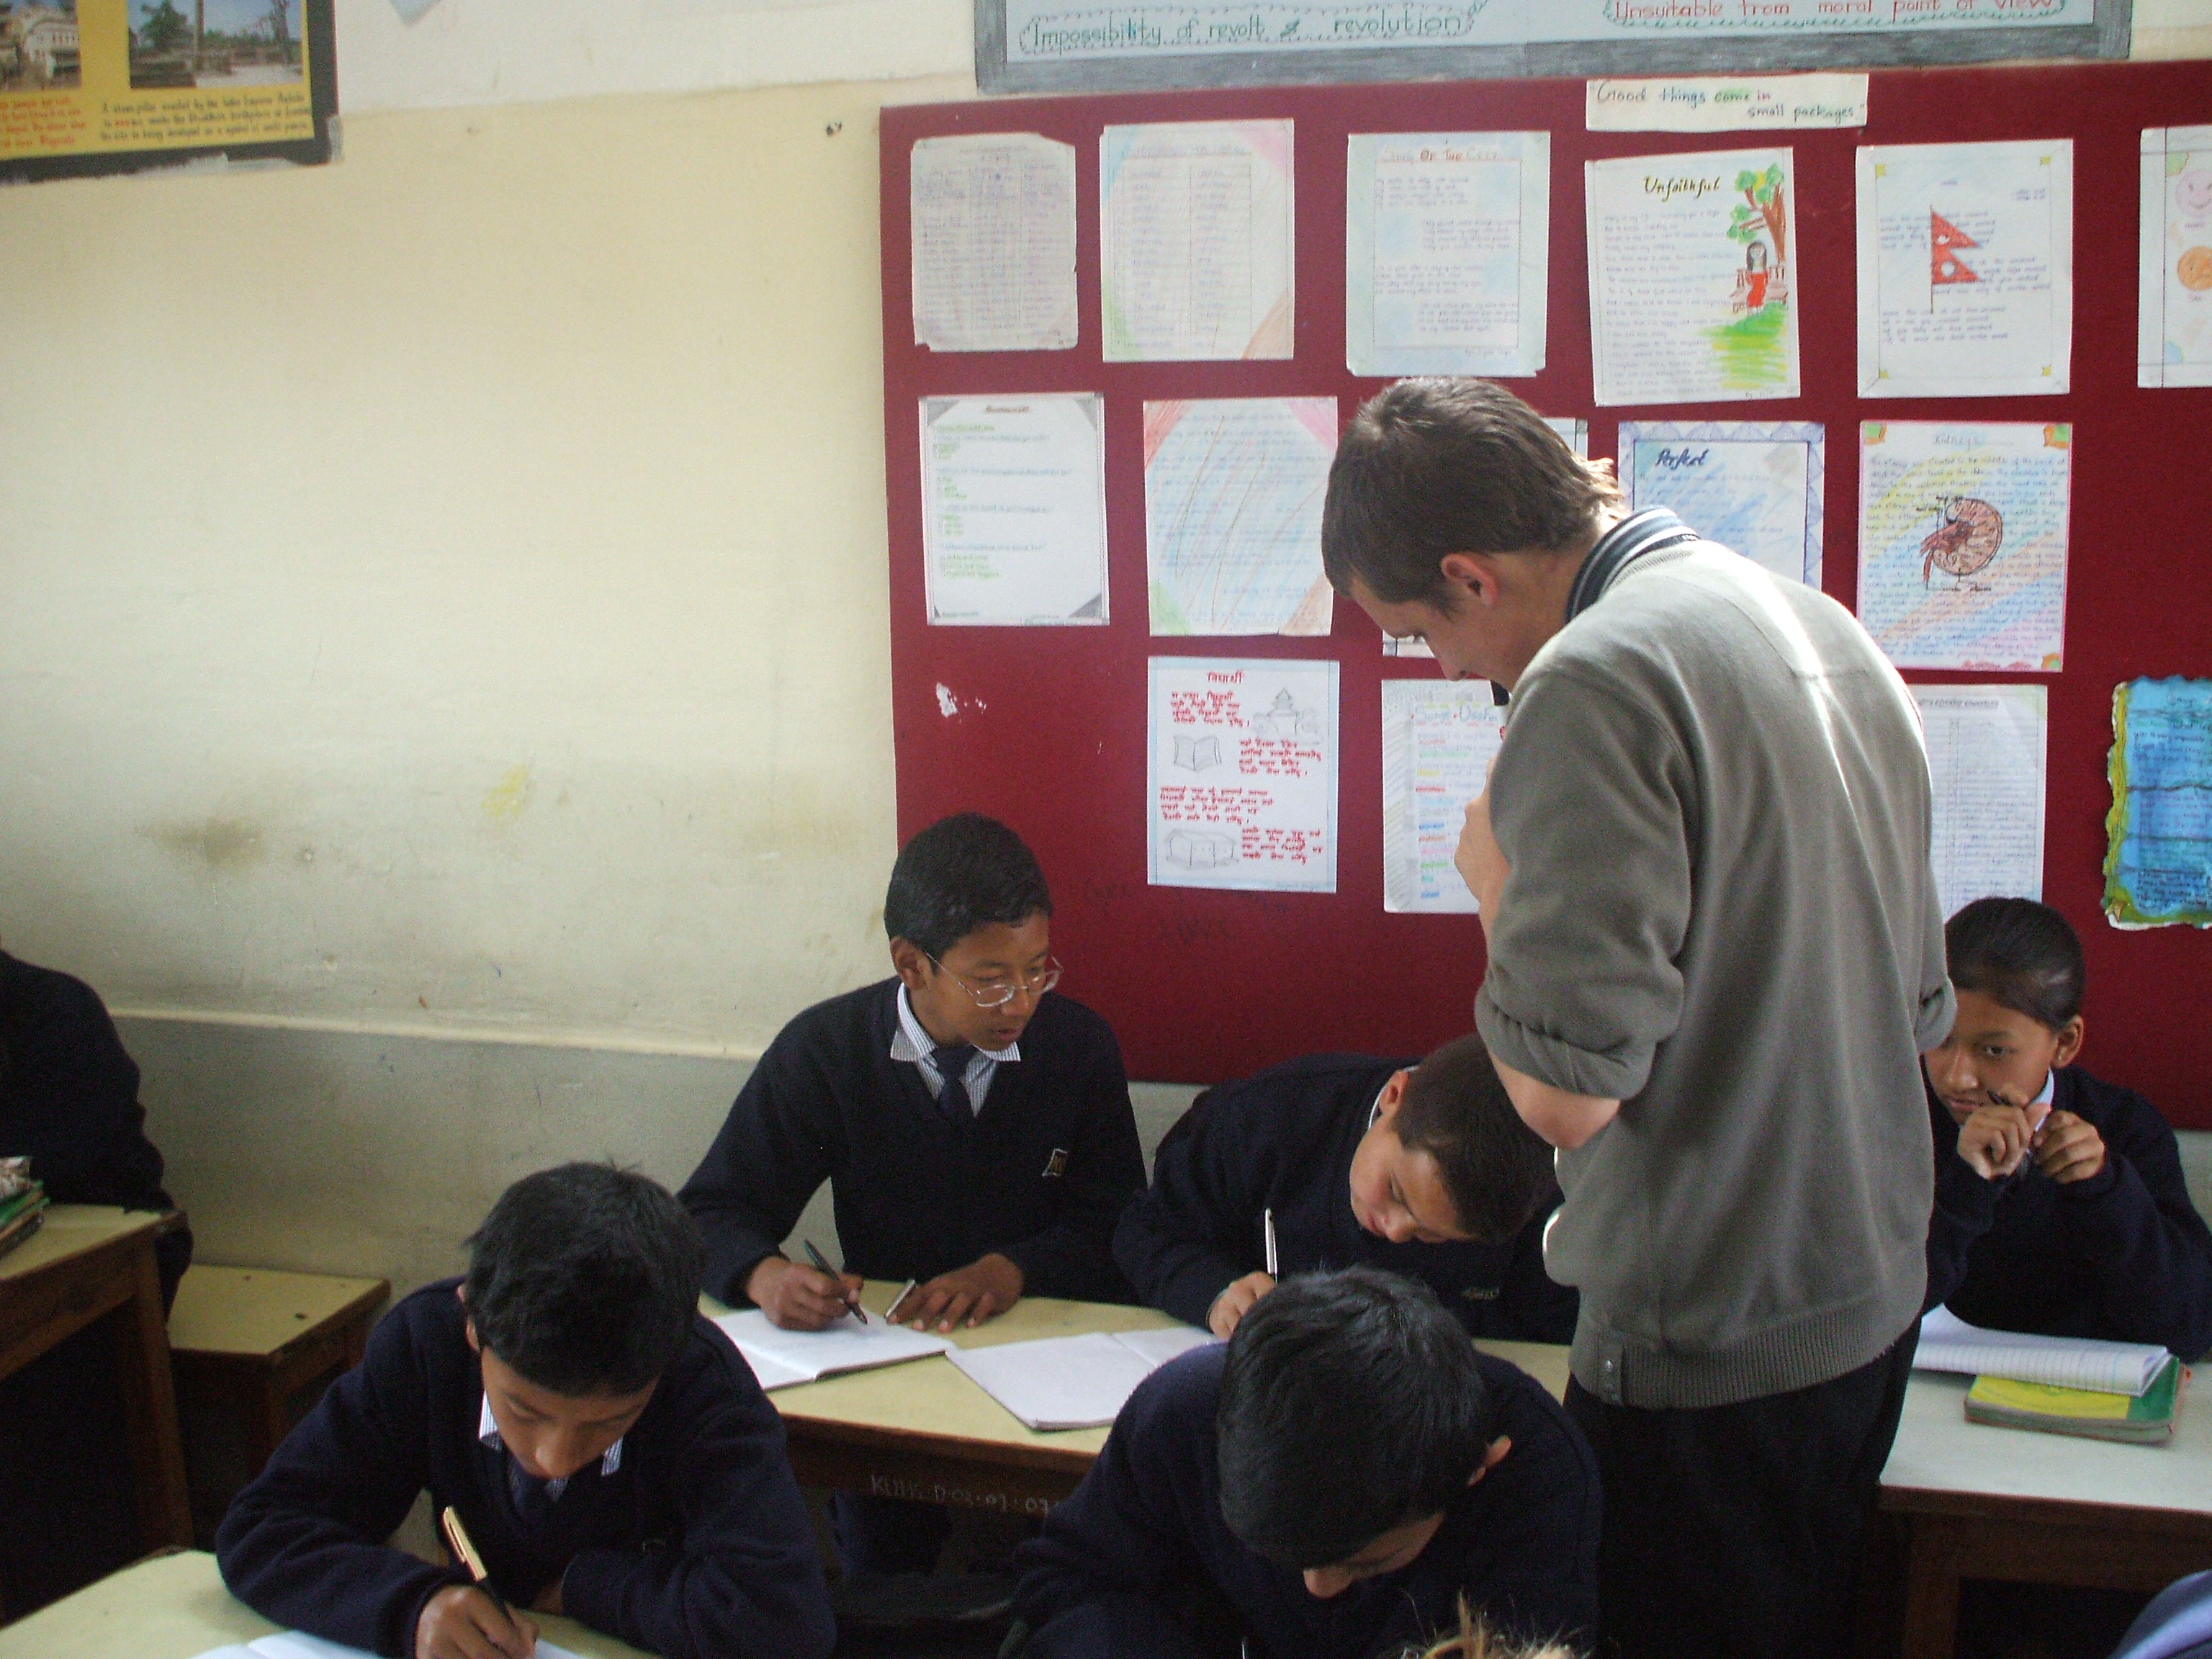 Where are they now? Sean McGann tells us how his life has changed since his time in Nepal